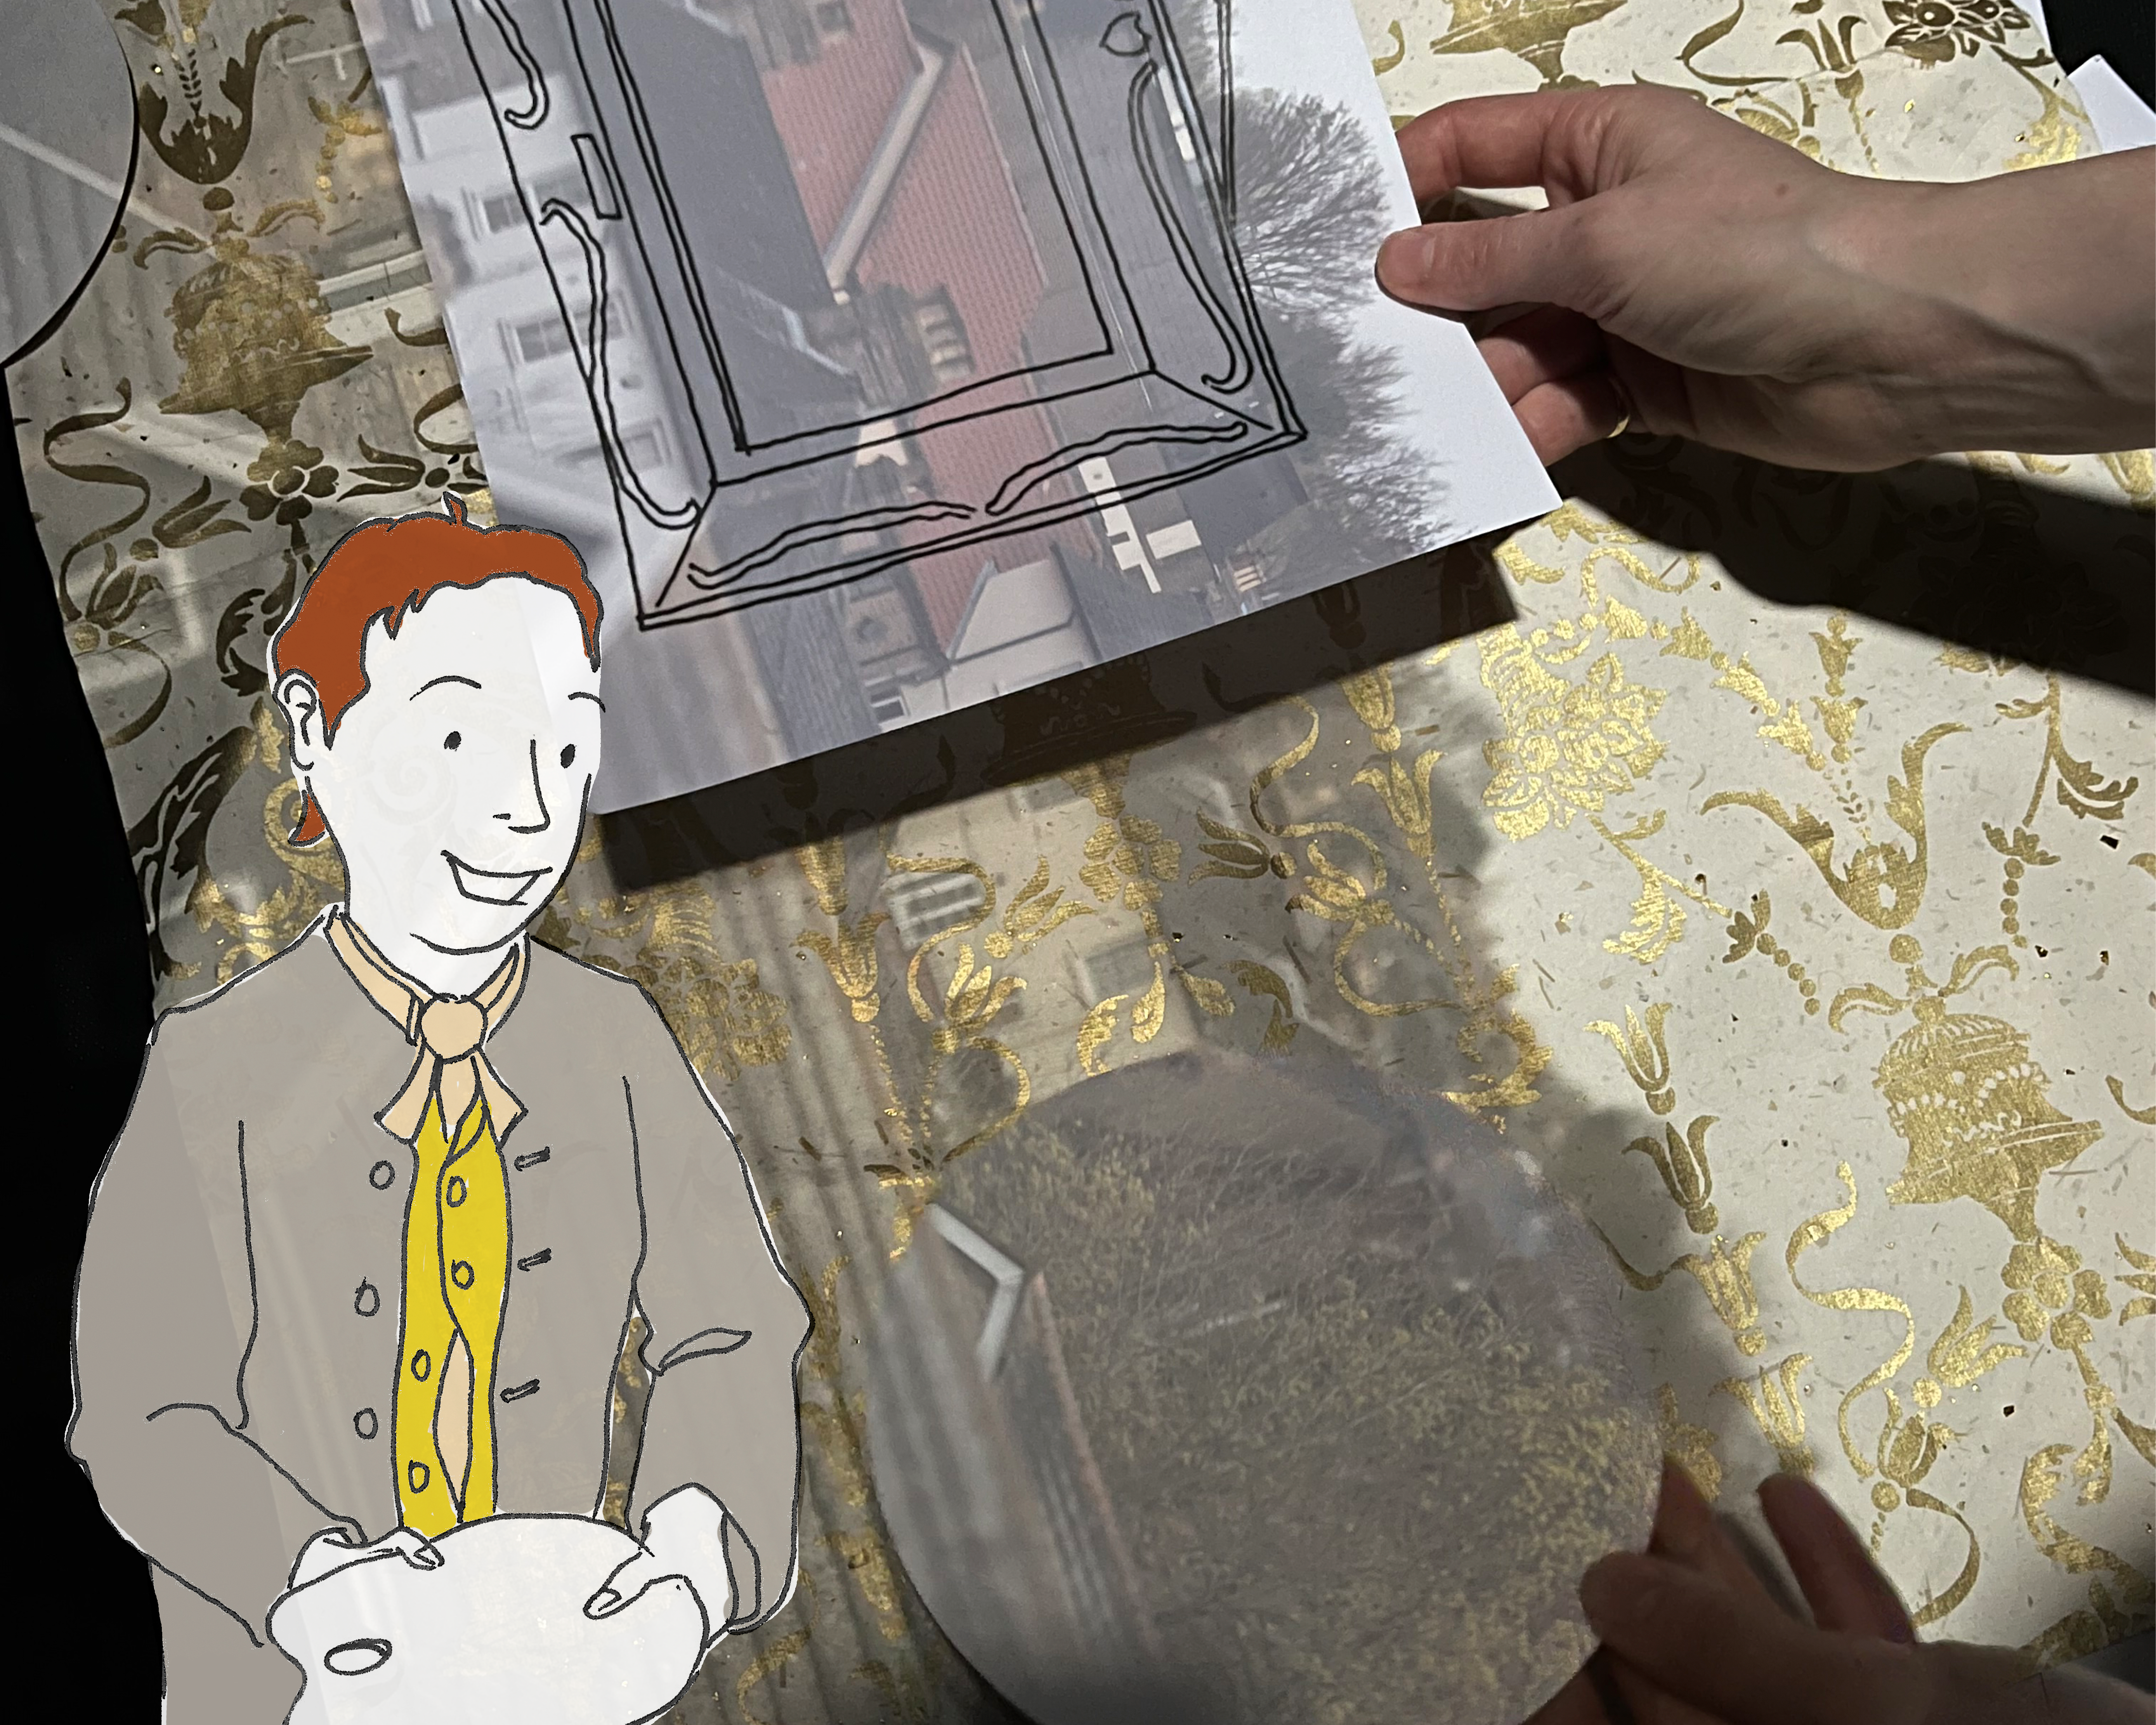 An image of two people holding resources up to the Camera obscura image projection. There is an overlayed illustration of Thomas Gainsborough's character to the left holding a paint palette.